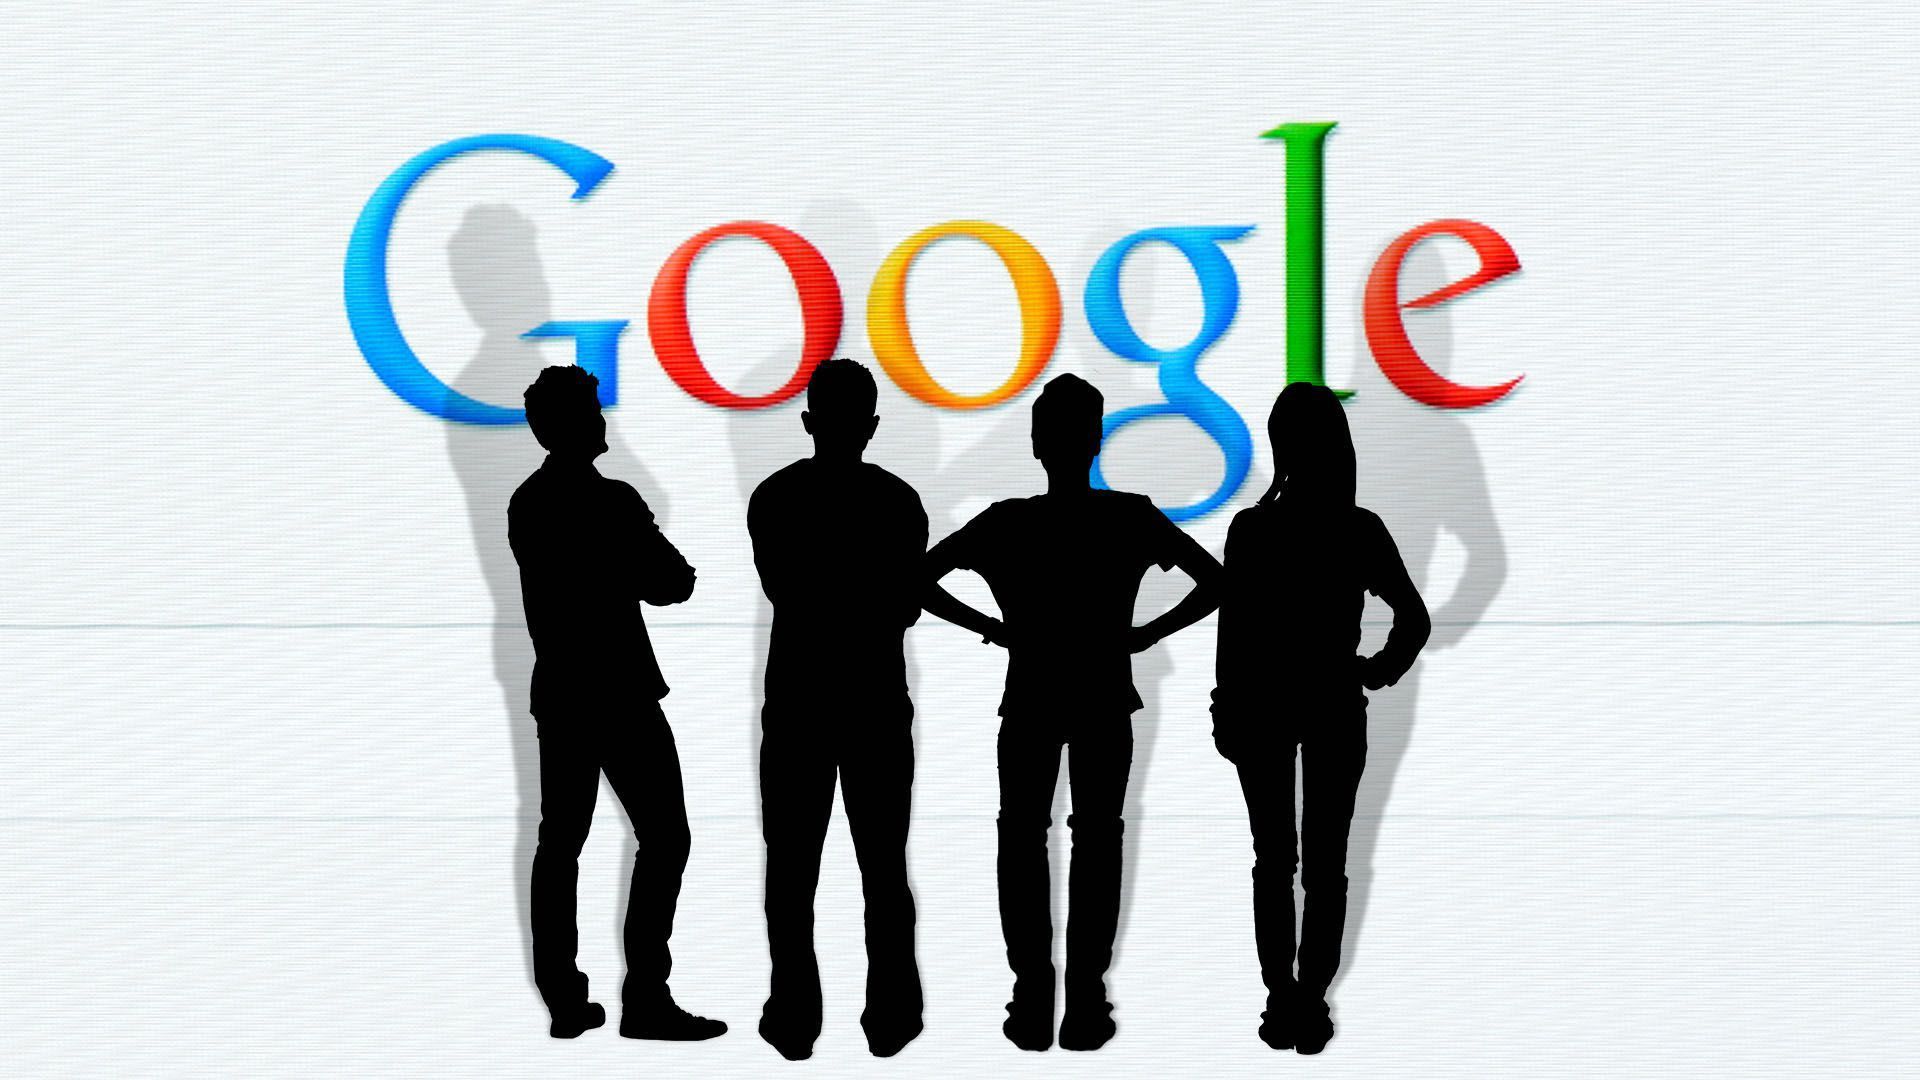 An illustration of darkened silhouettes in front of the Google logo.